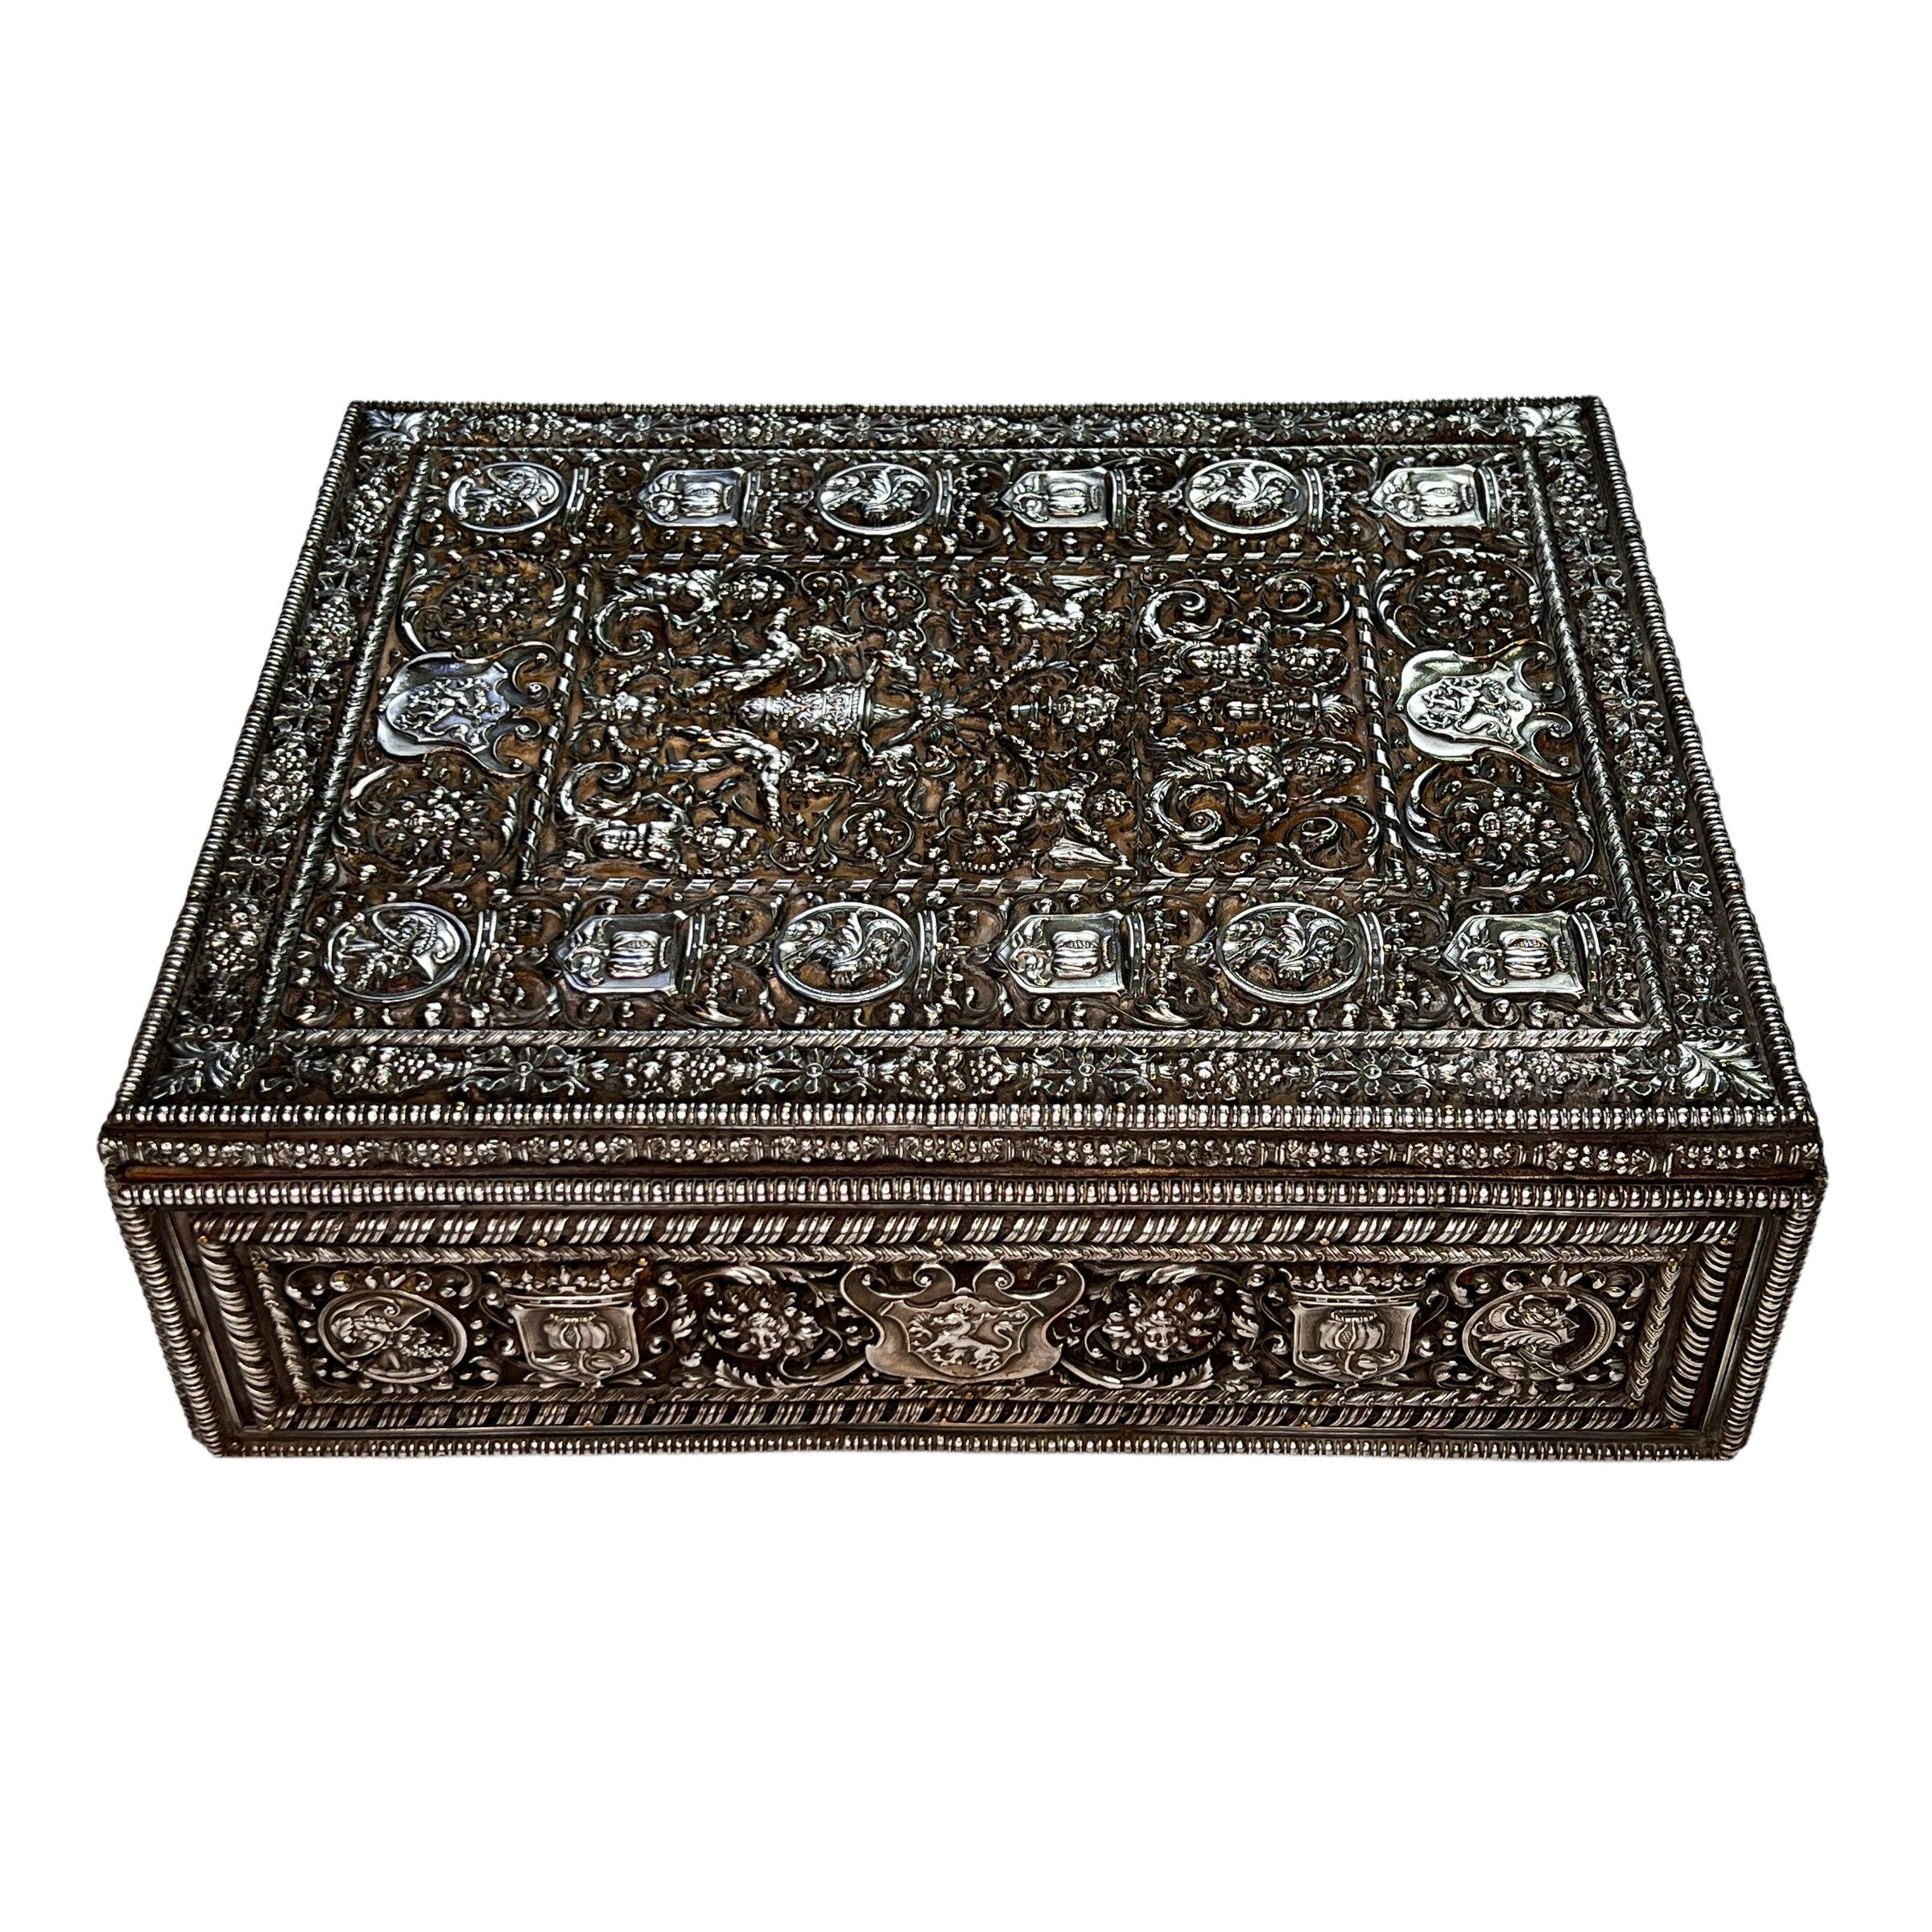 American E.F. Caldwell Silverplated Humidor Box in Renaissance Style